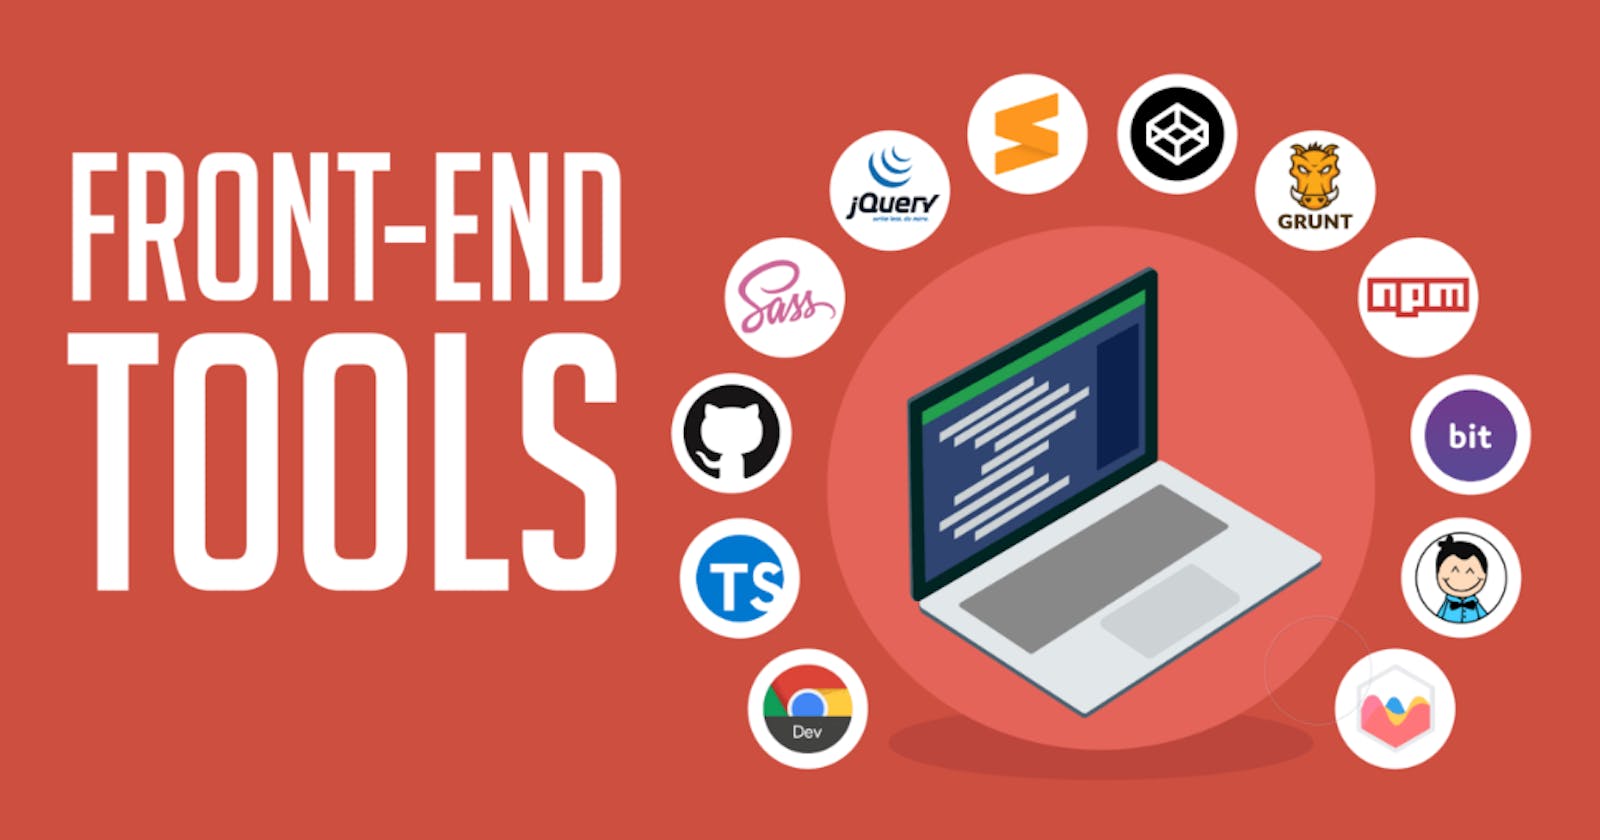 Explore essential tools and resources for frontend development success. 🔧